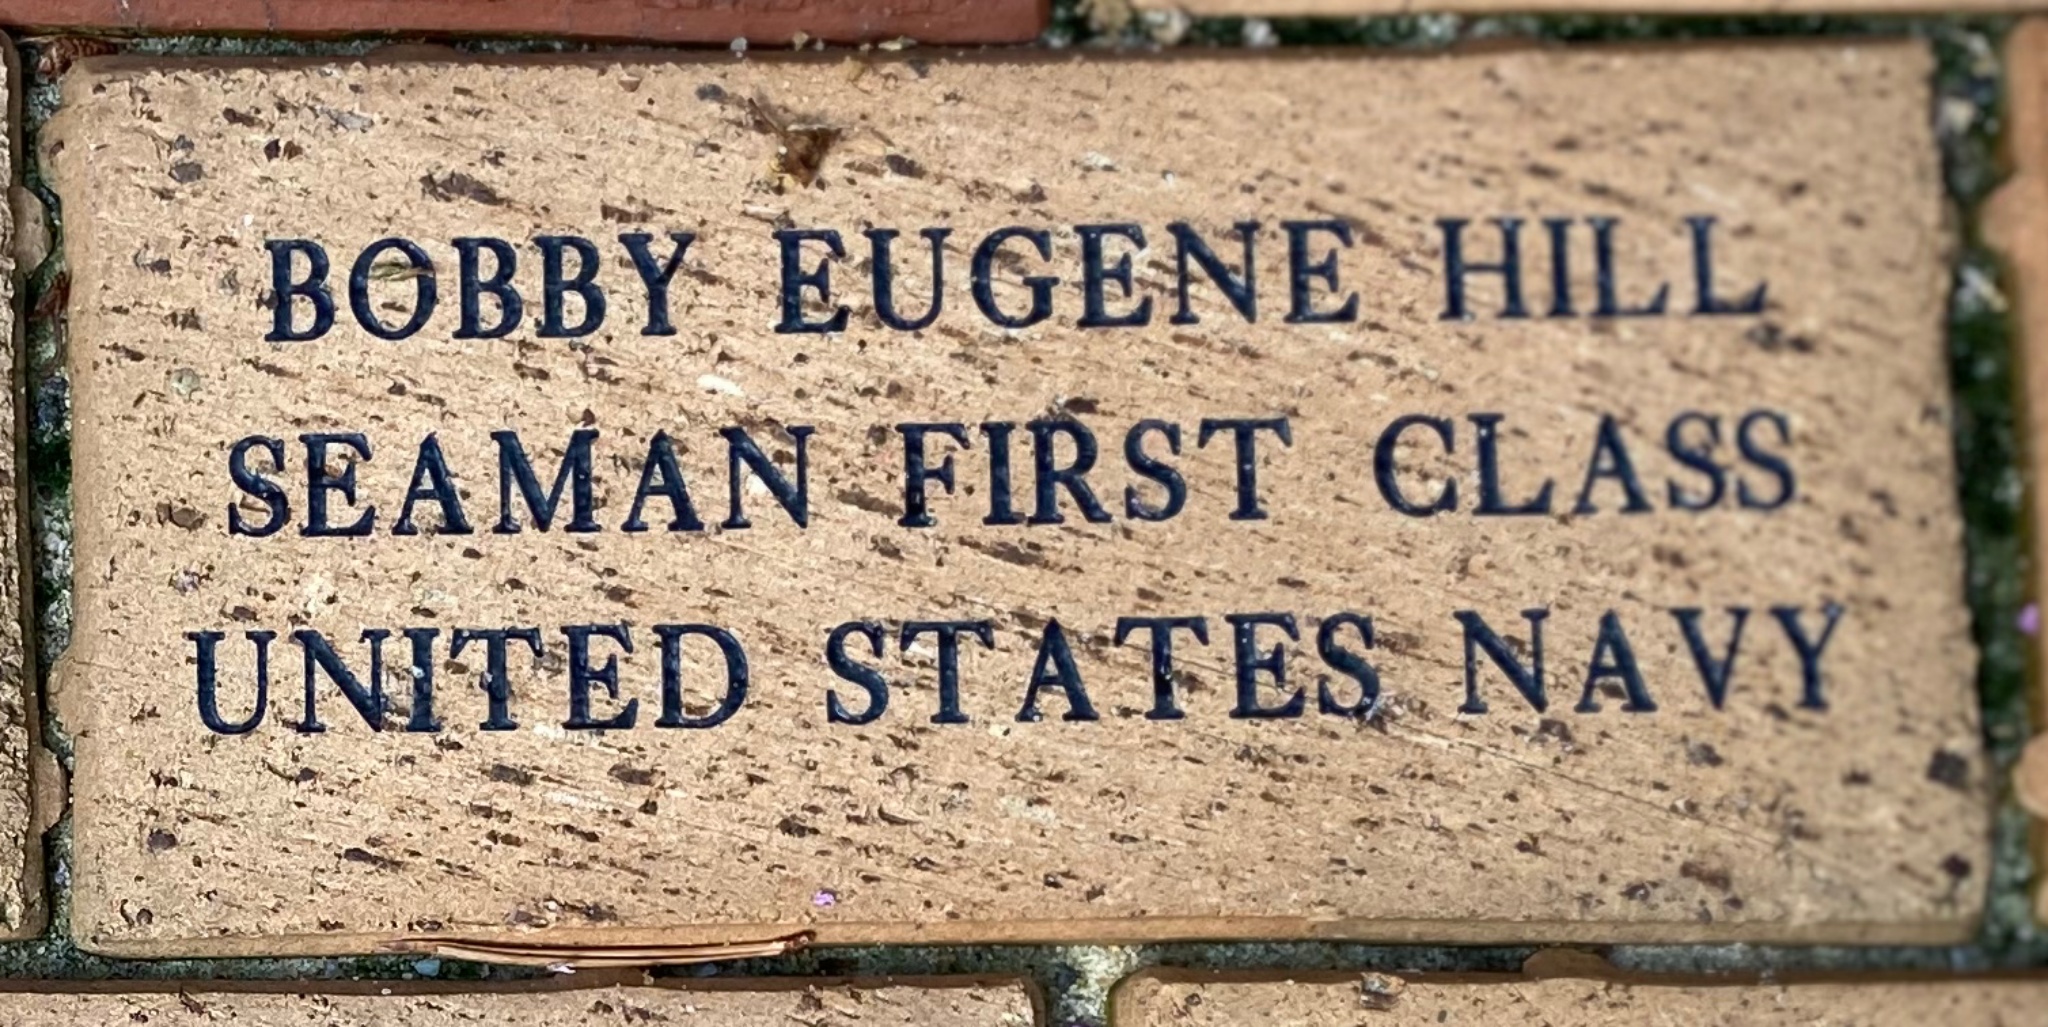 BOBBY EUGENE HILL SEAMAN FIRST CLASS UNITED STATES NAVY